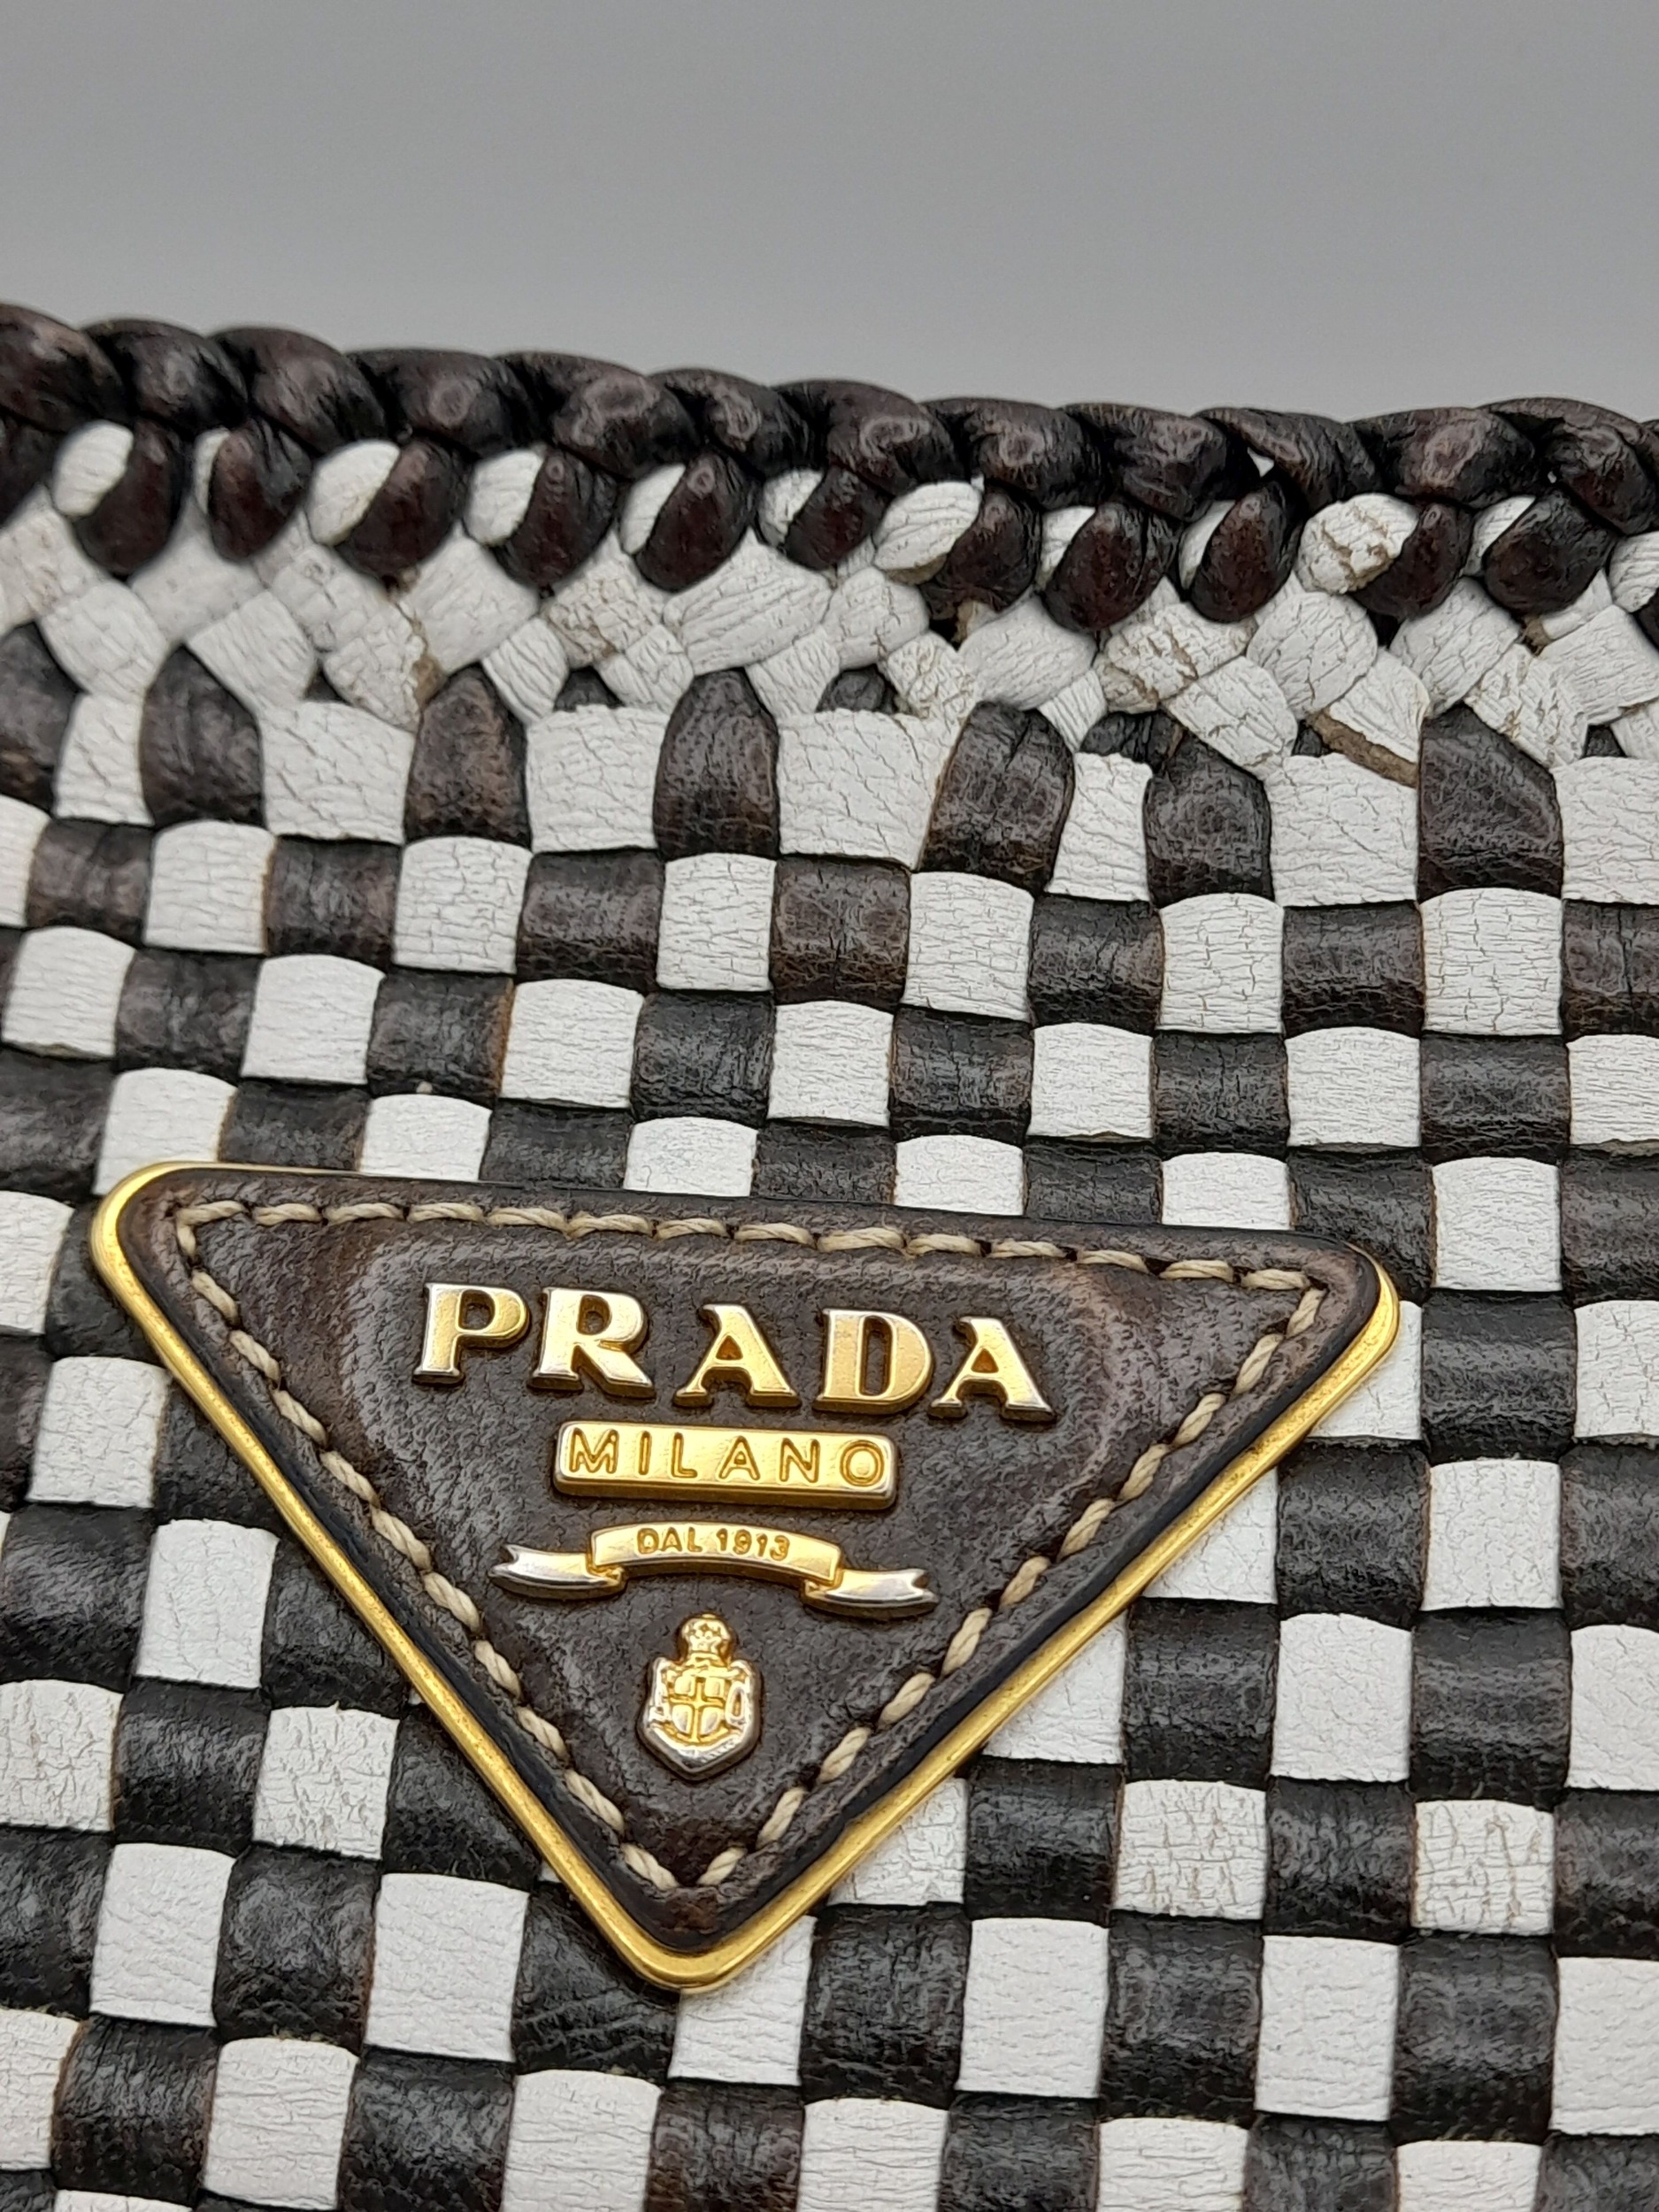 A Prada Black and White 'Madras' Clutch Bag. Woven leather exterior with gold-toned hardware and - Image 5 of 9